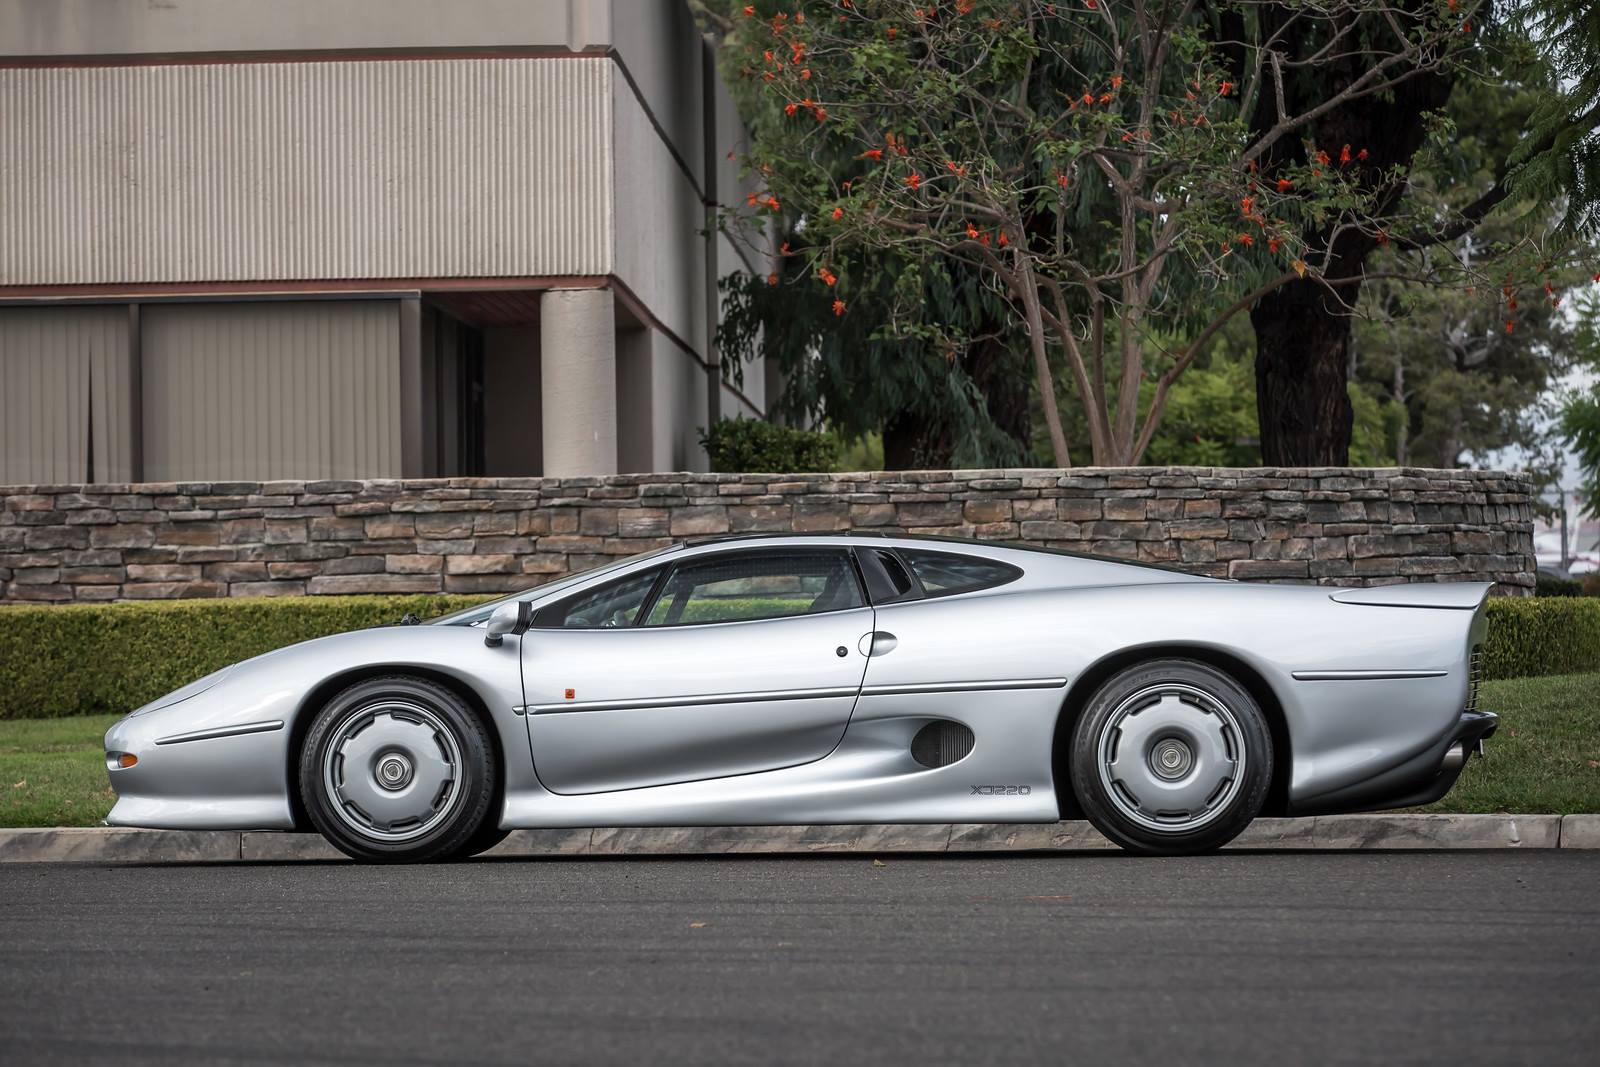 Rare Left Hand Drive Jaguar XJ220  For Sale in the US 